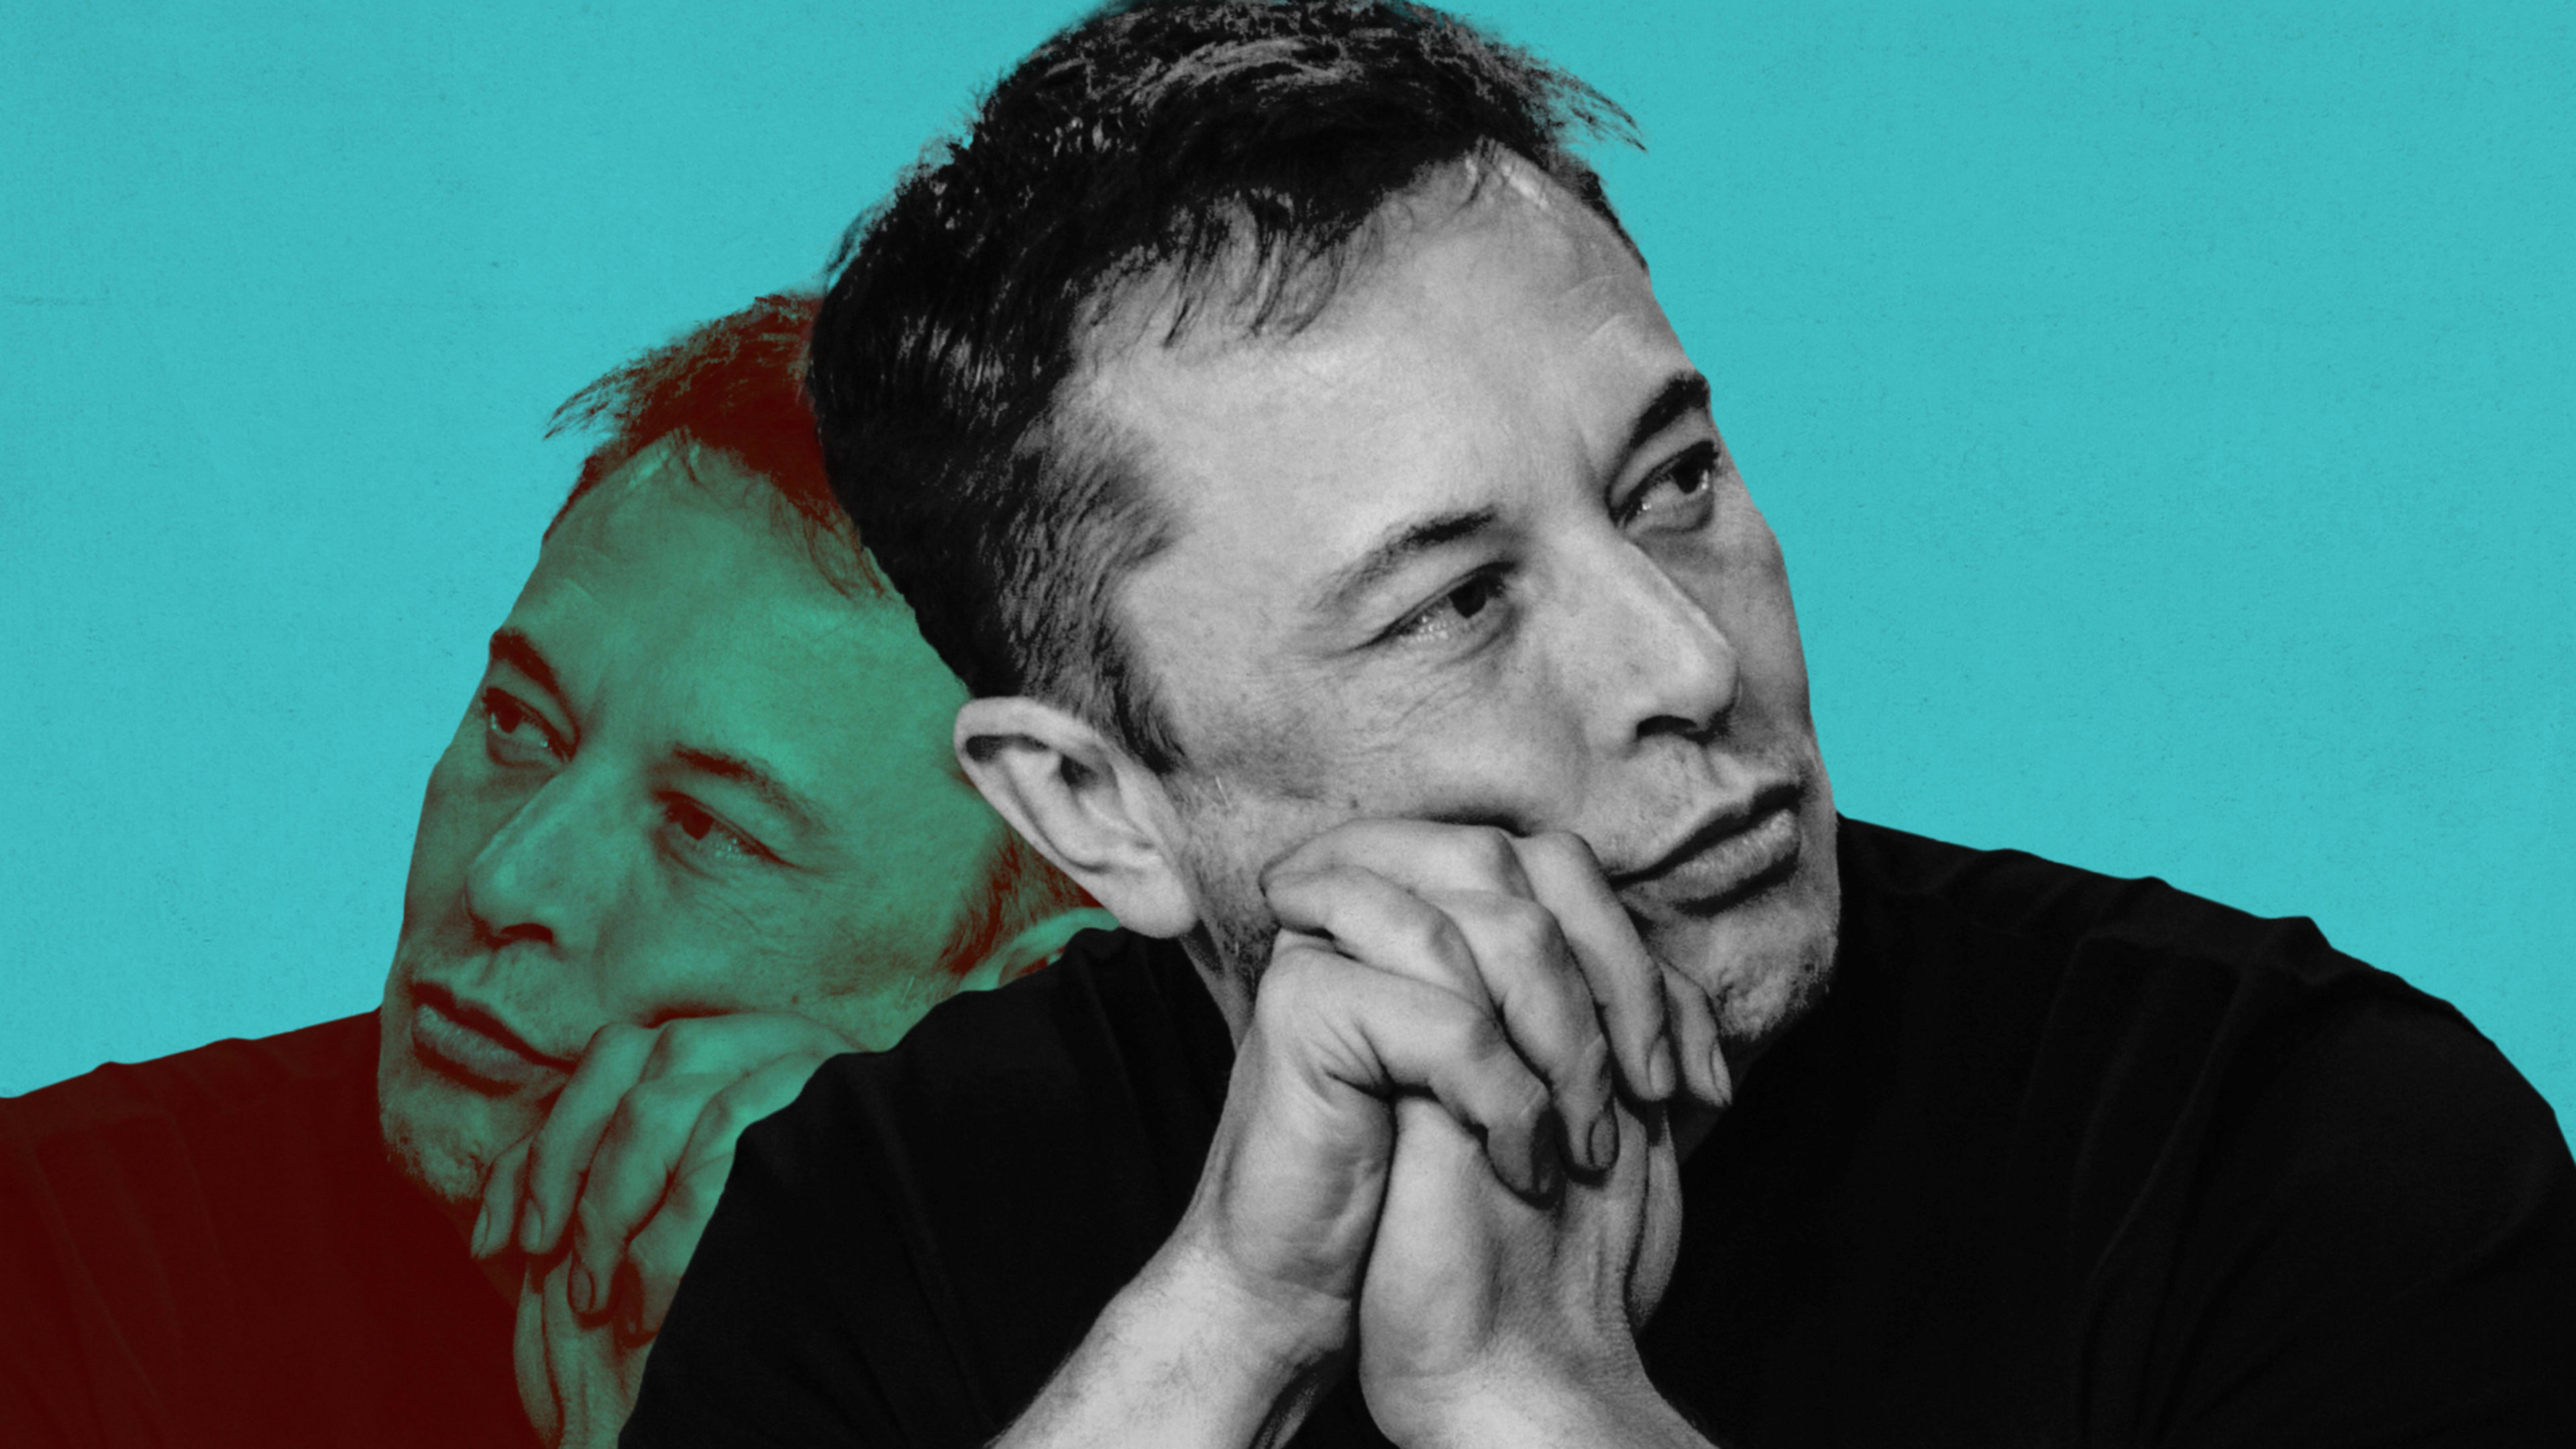 Verified Elon Musk impersonator hitches a ride on Trump’s viral COVID-19 tweet for bitcoin scam